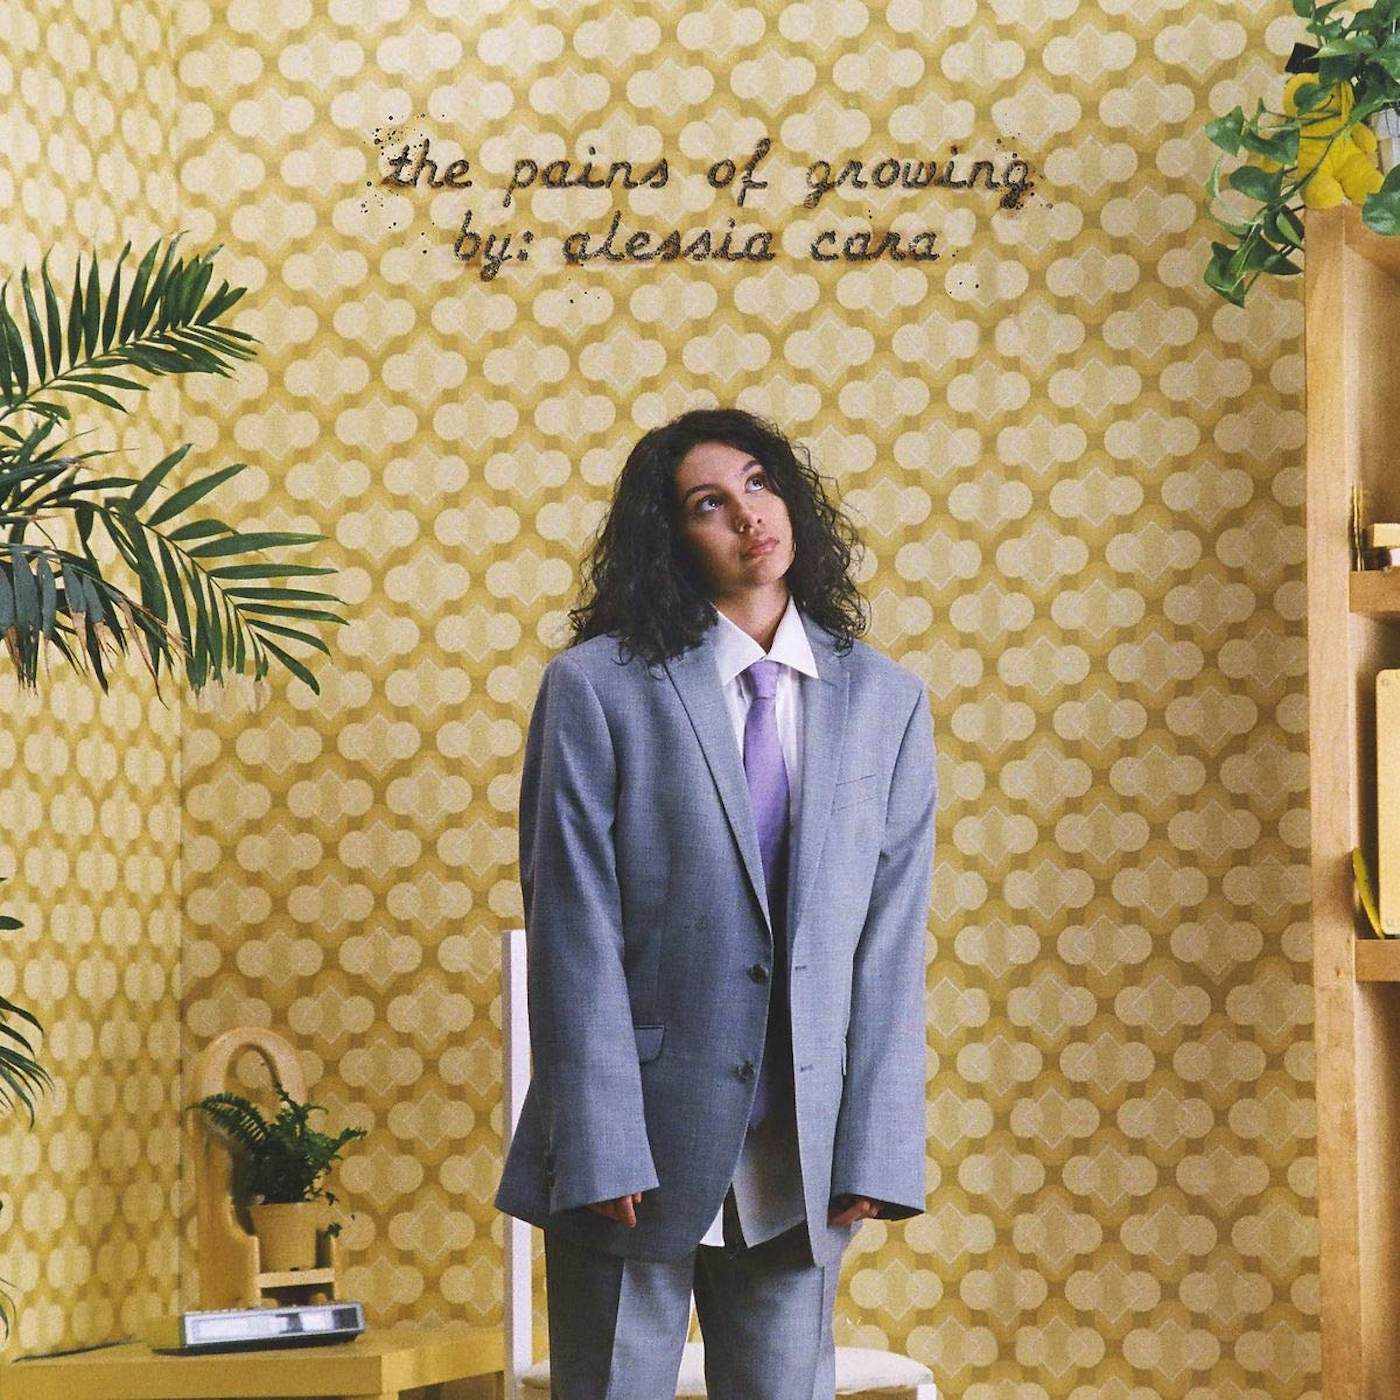 Alessia Cara PAINS OF GROWING 2LP Vinyl Record